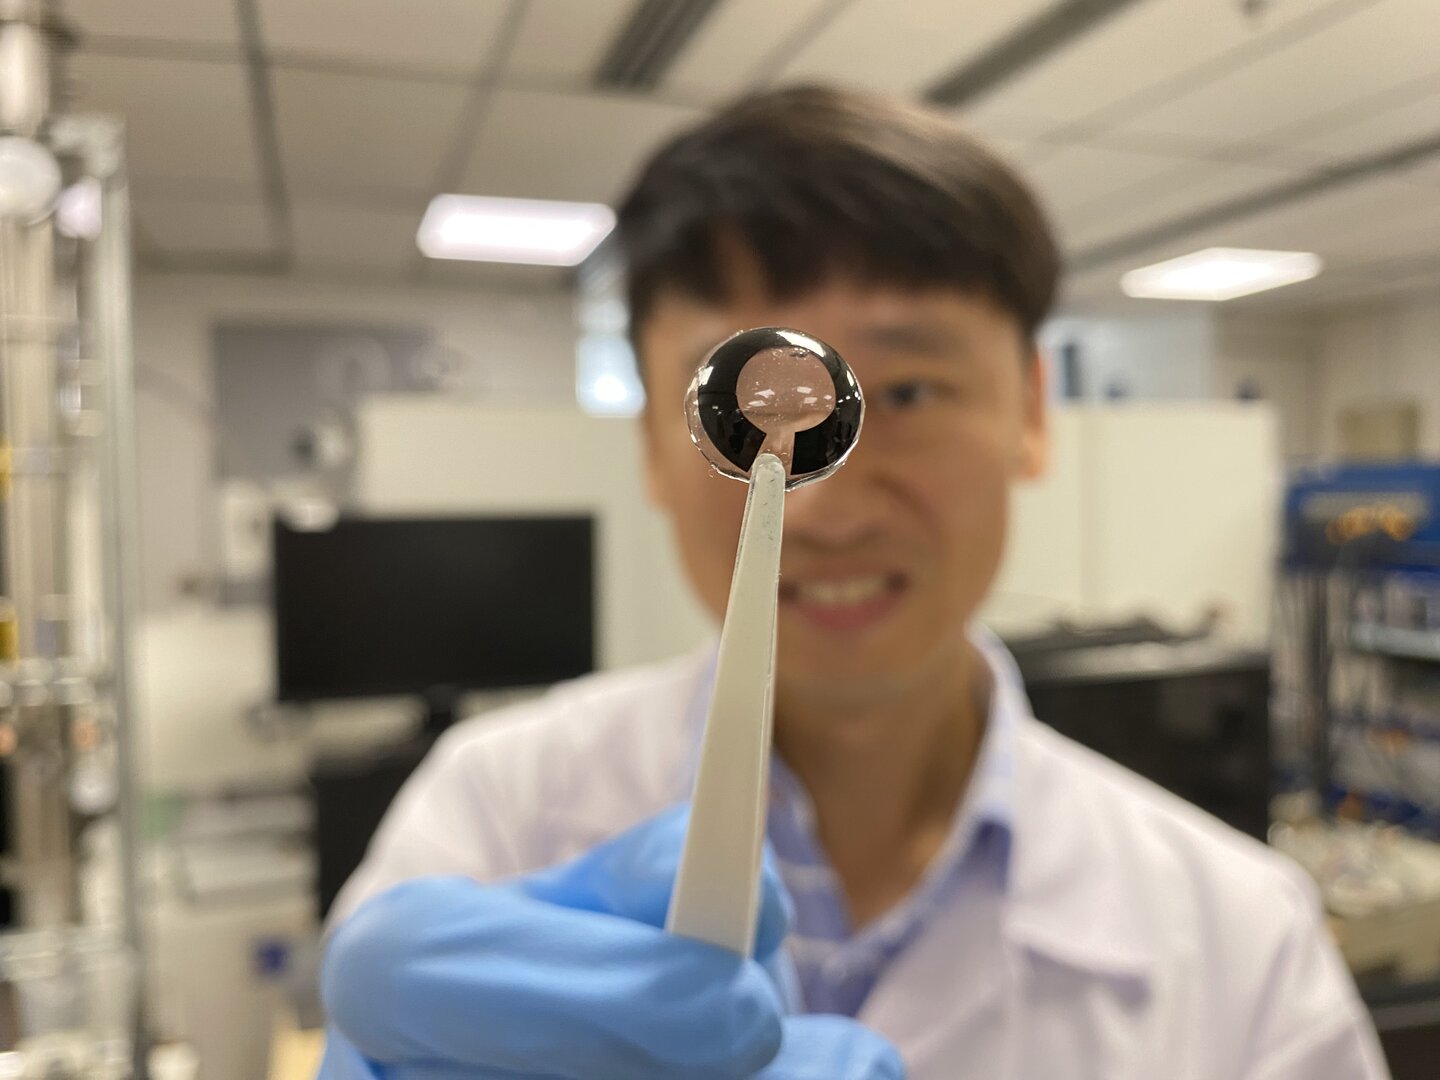 Image: Scientists have developed an ultra-thin battery powered by saline for smart contact lenses (Photo courtesy of NTU Singapore)